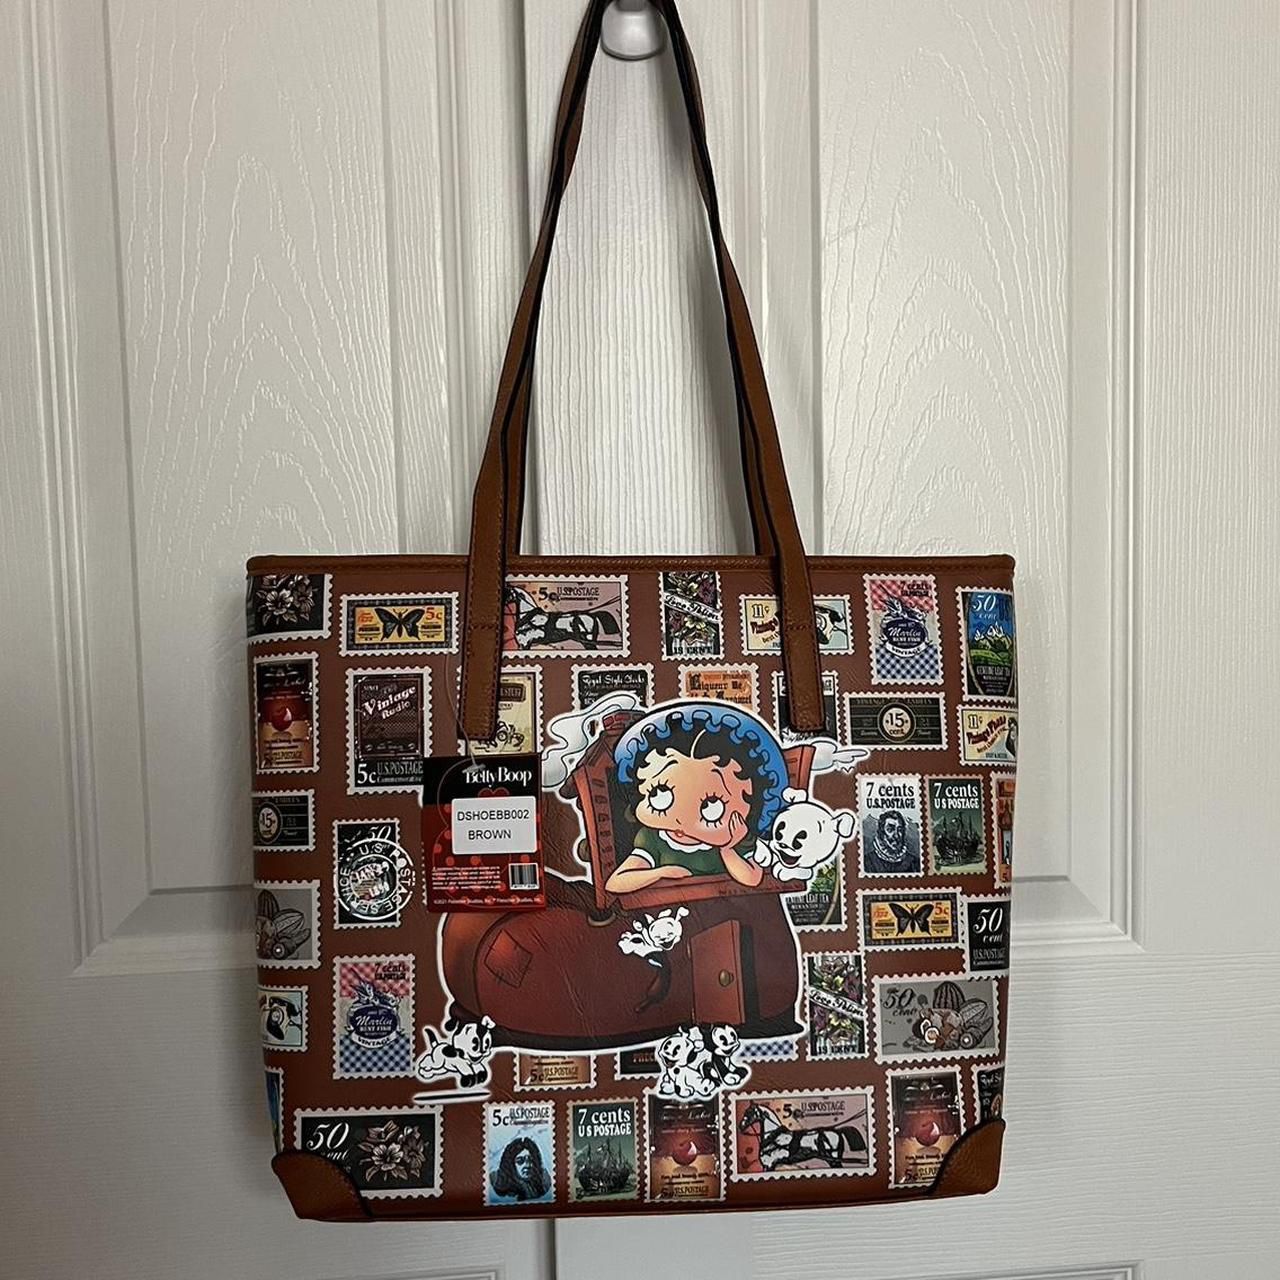 brown leather Betty boop tote purse 👜 No Tags❣️